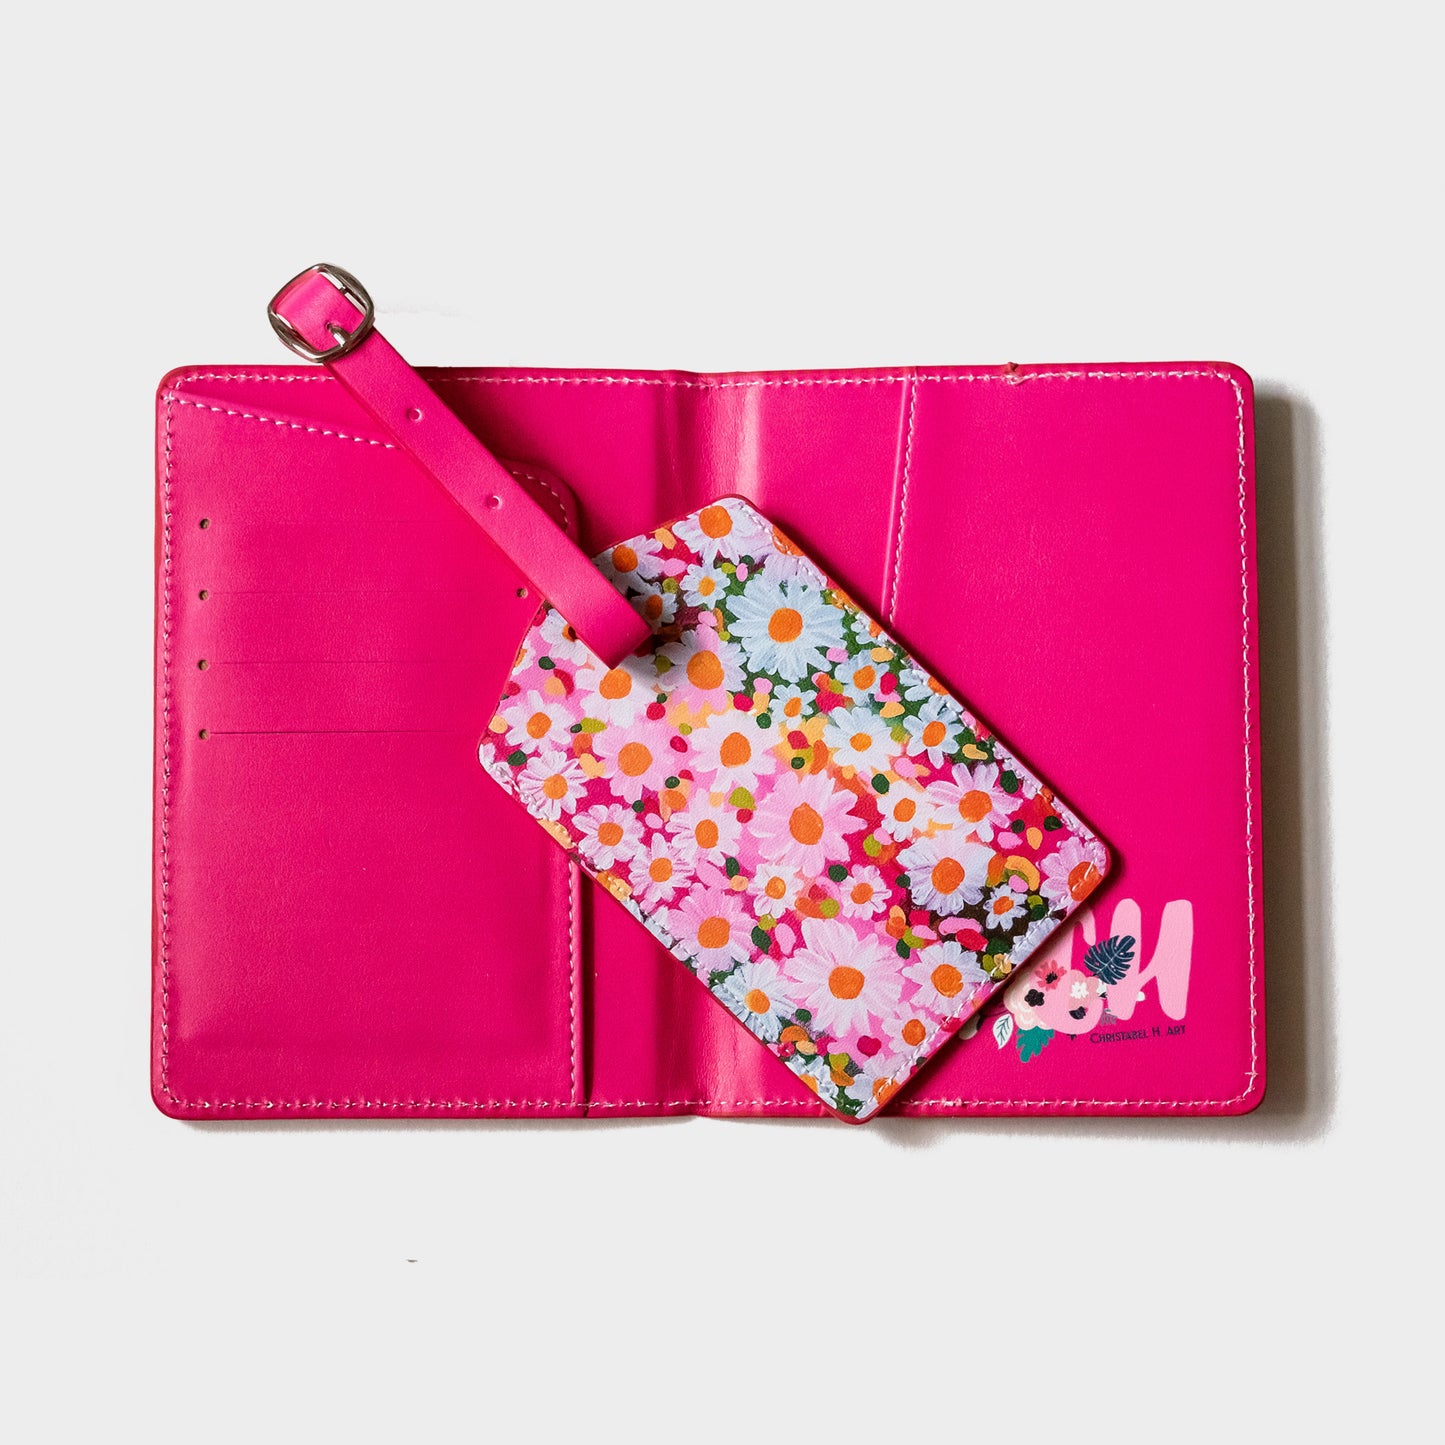 Miss Daisy Travel Accessory - Bag Tag & Travel Wallet